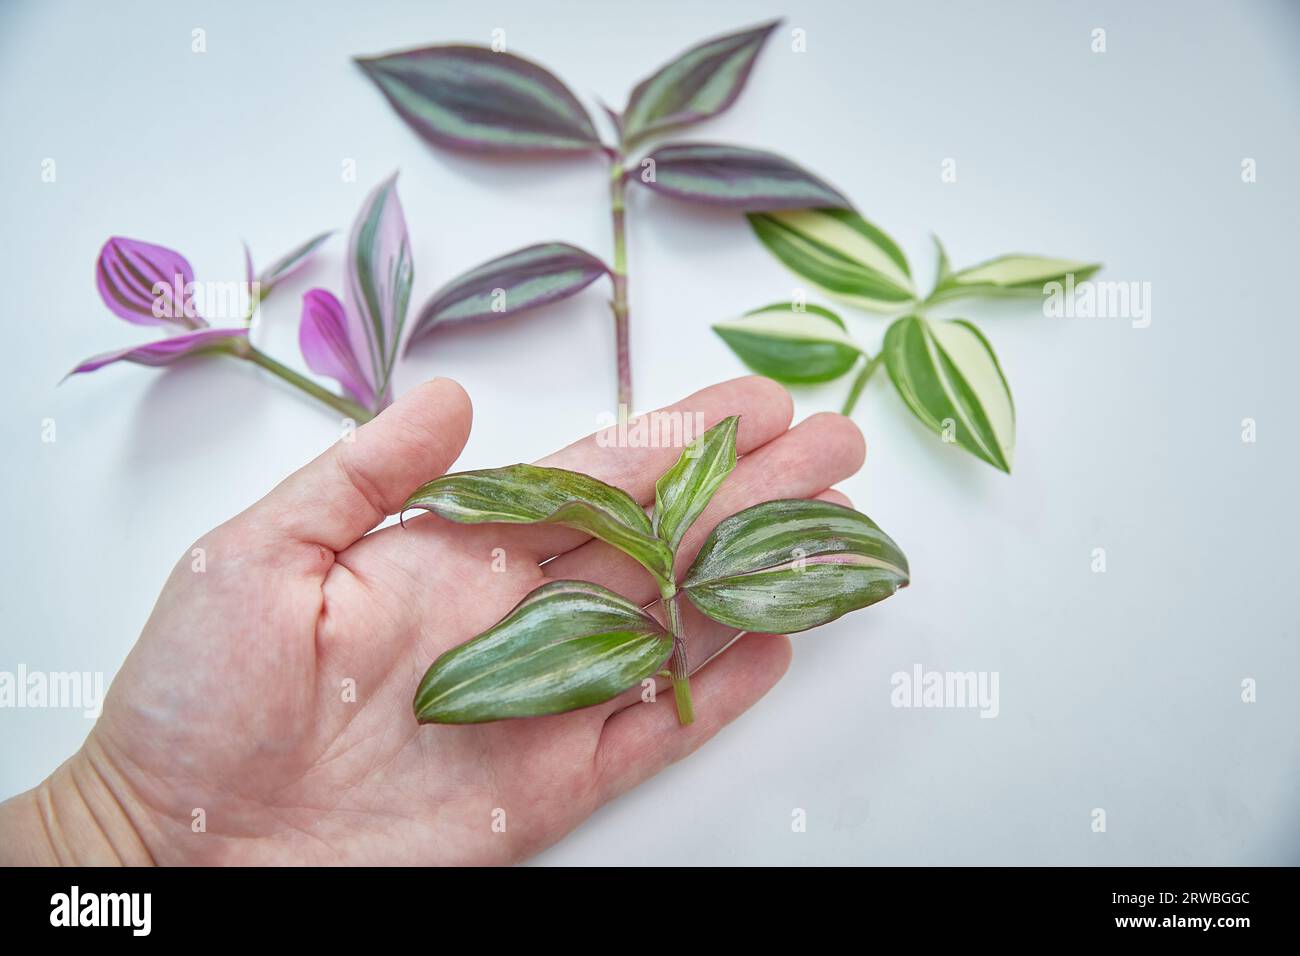 A set of slices of houseplants of tradescantia of different varieties. Thai quadricolor in the foreground Stock Photo